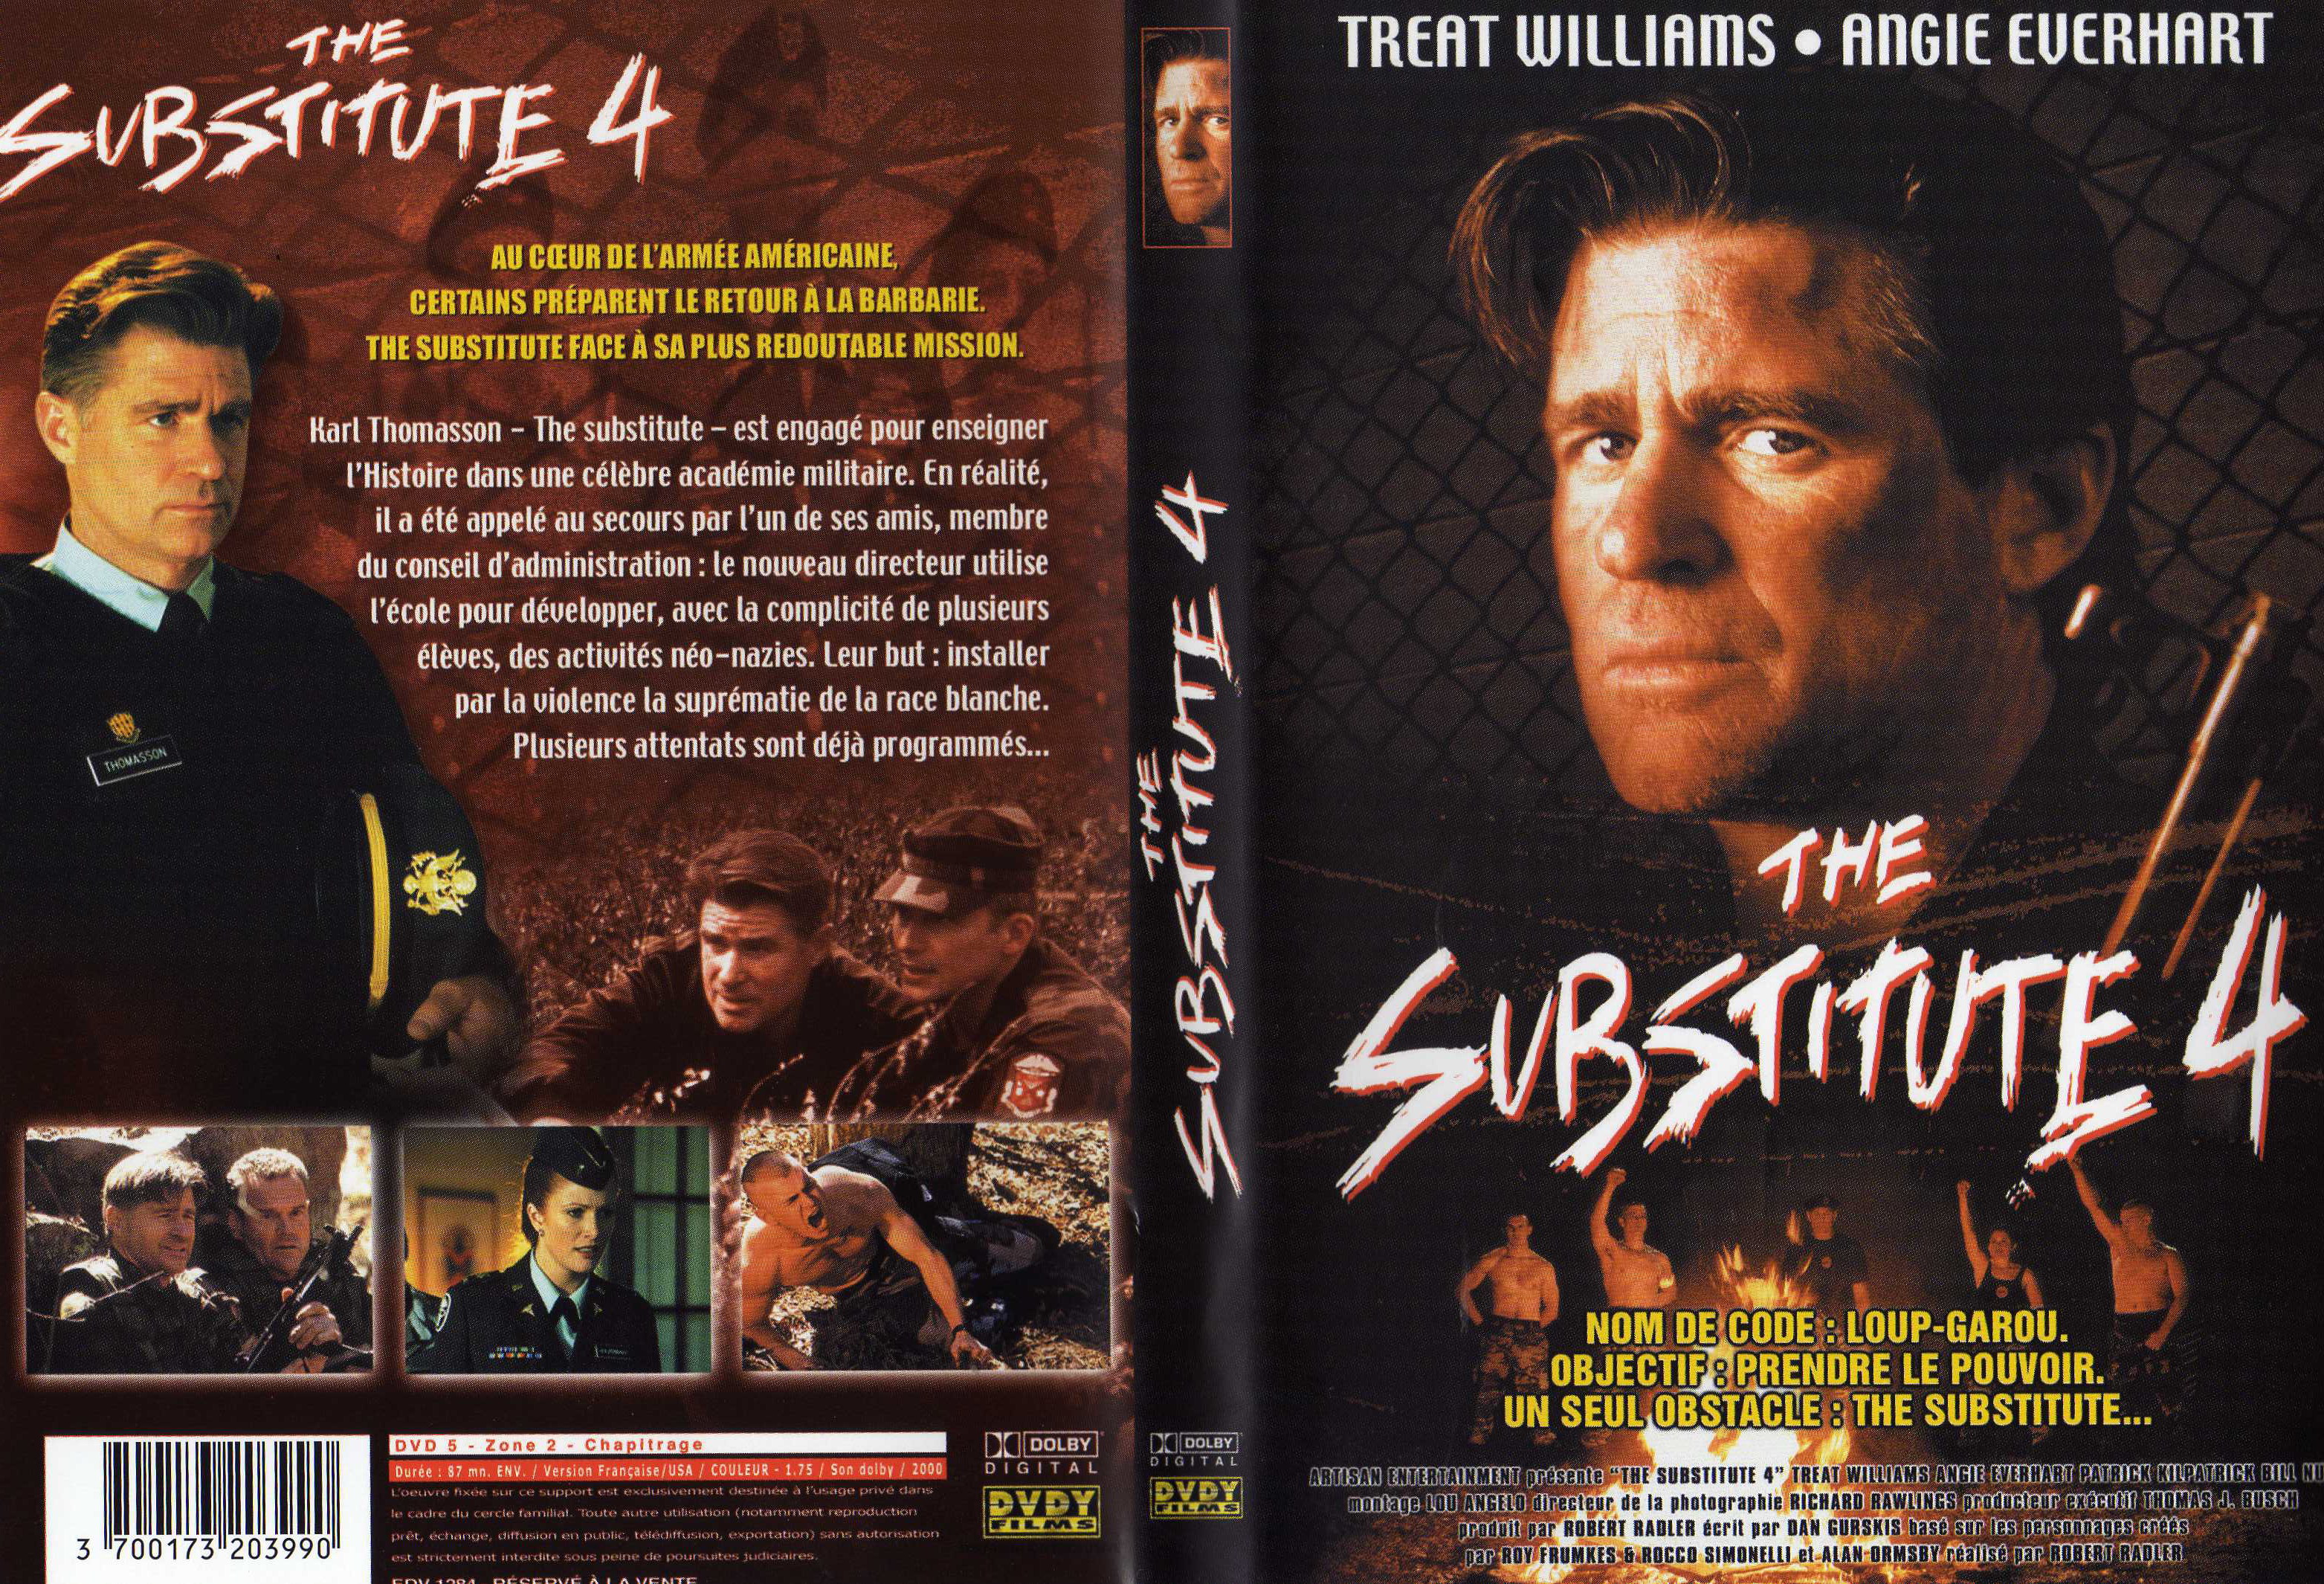 Jaquette DVD The substitute 4